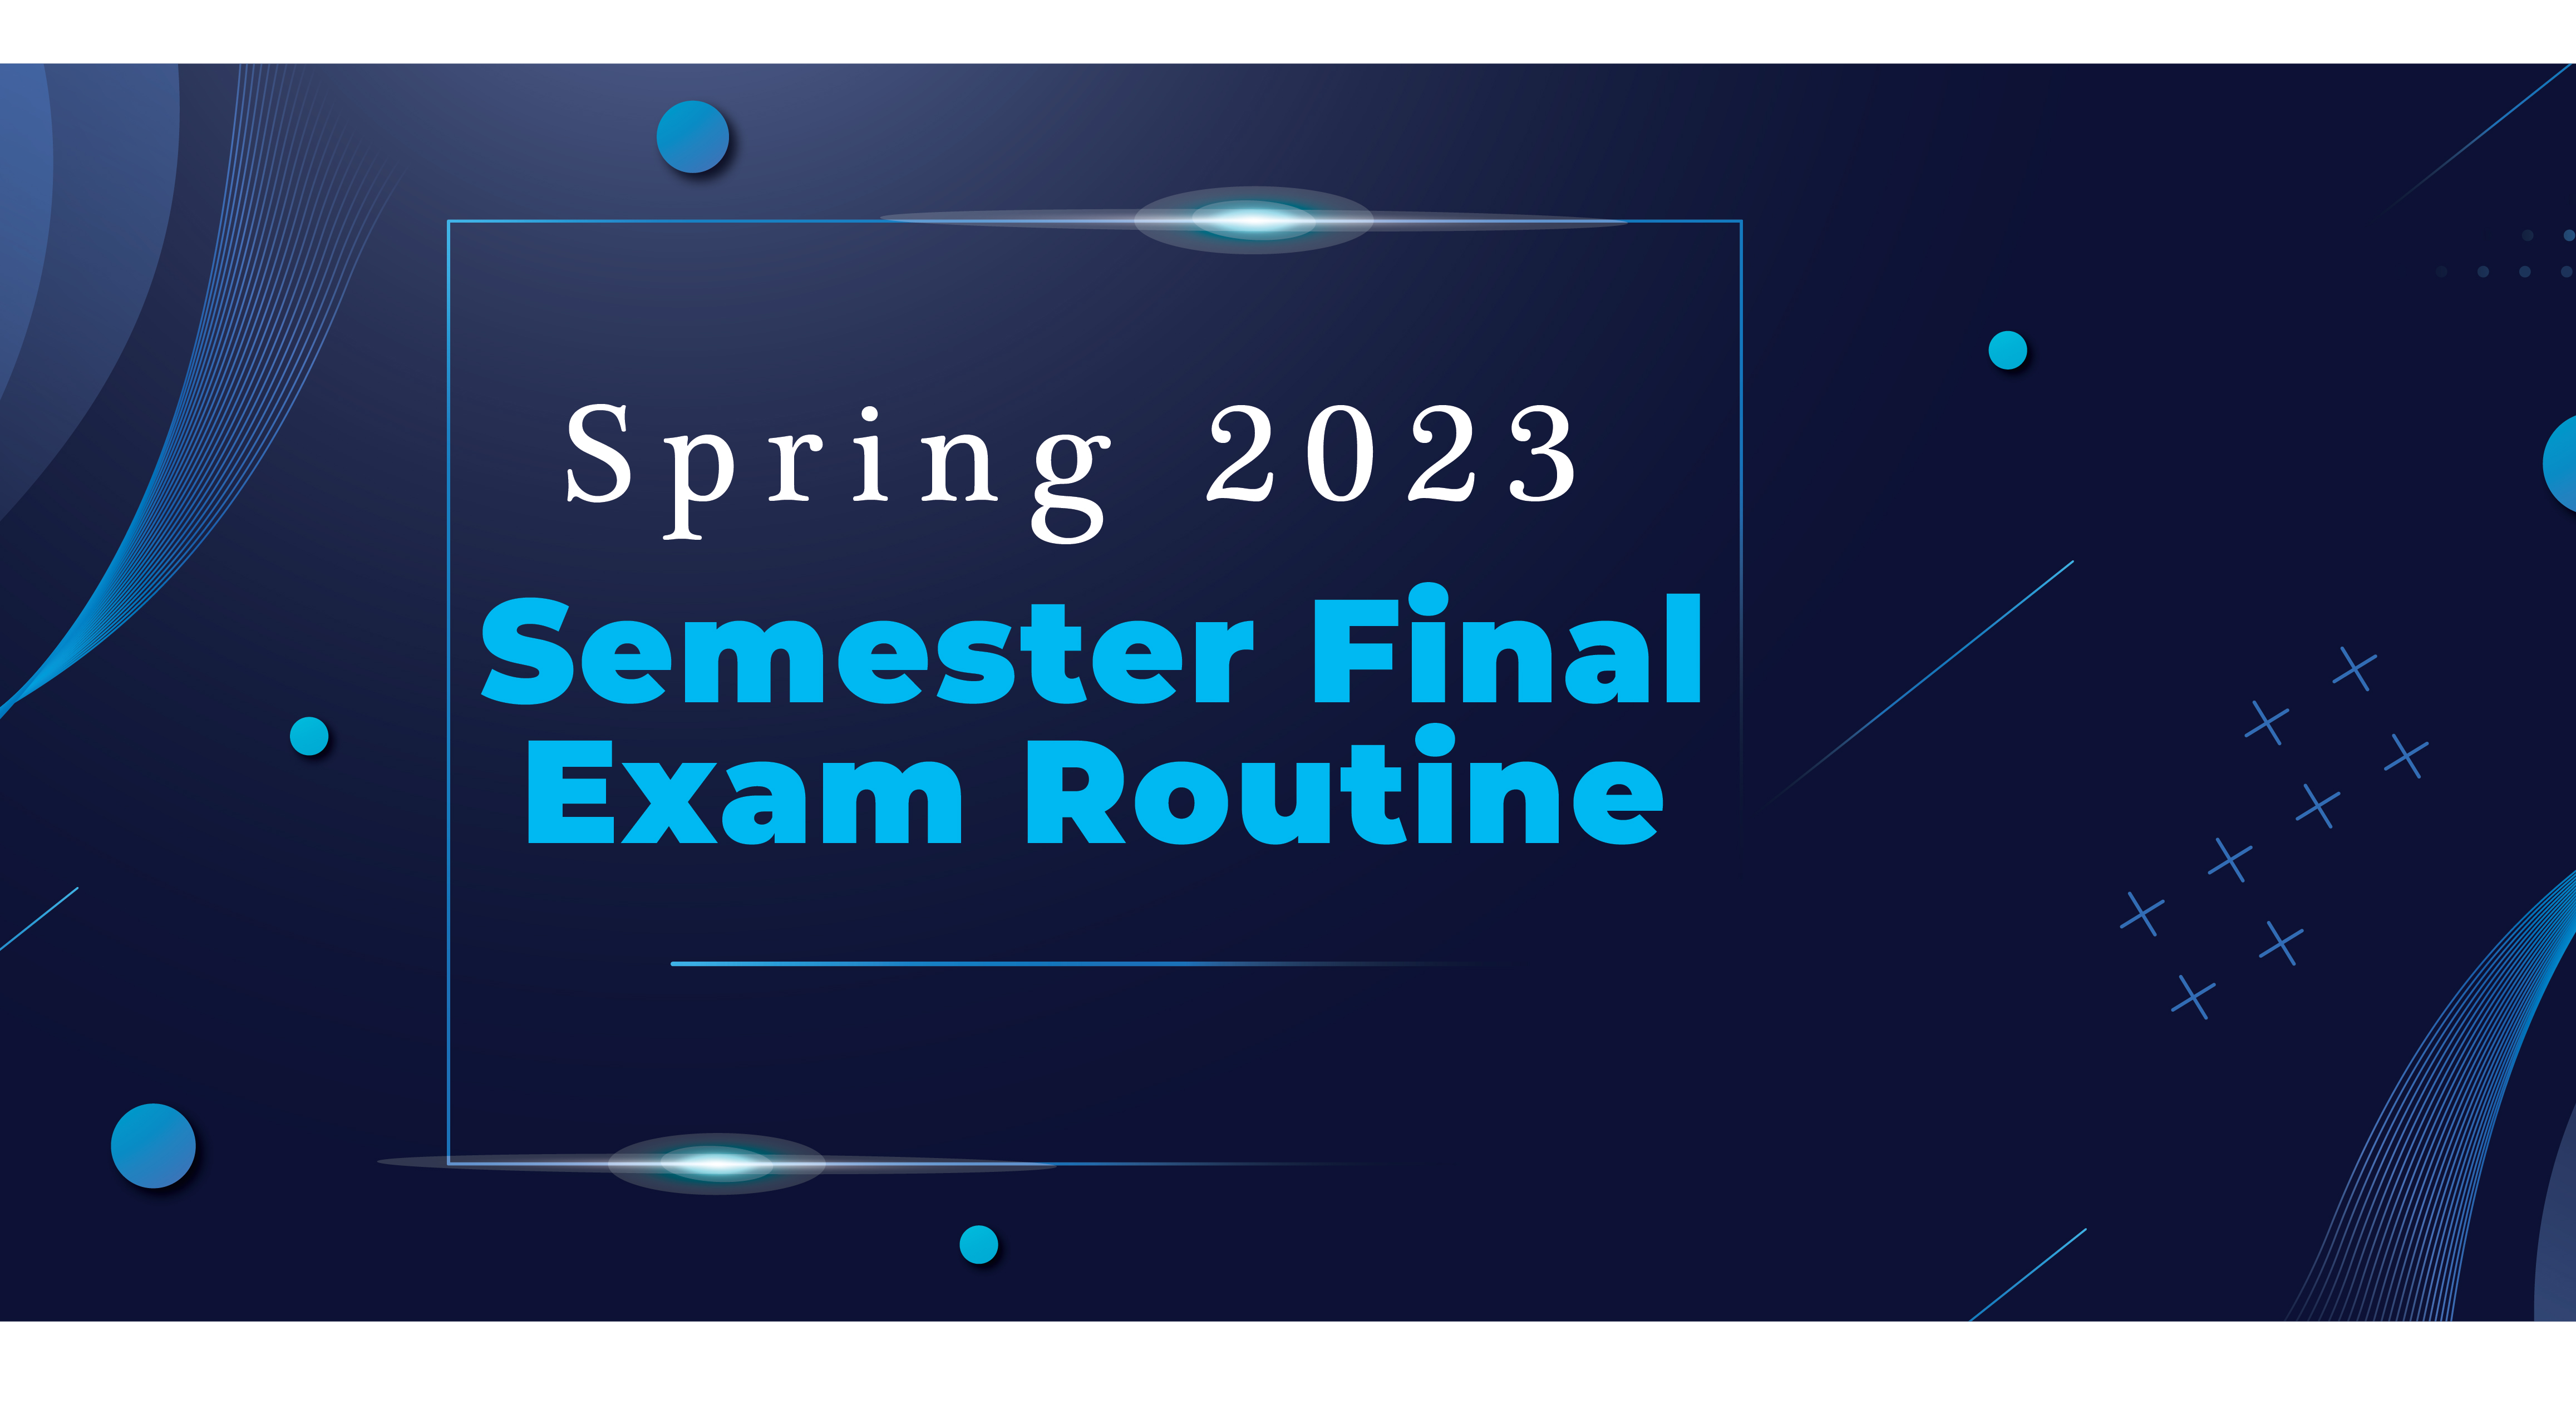 SPRING 2023 SEMESTER FINAL EXAM ROUTINE FOR BENGALI